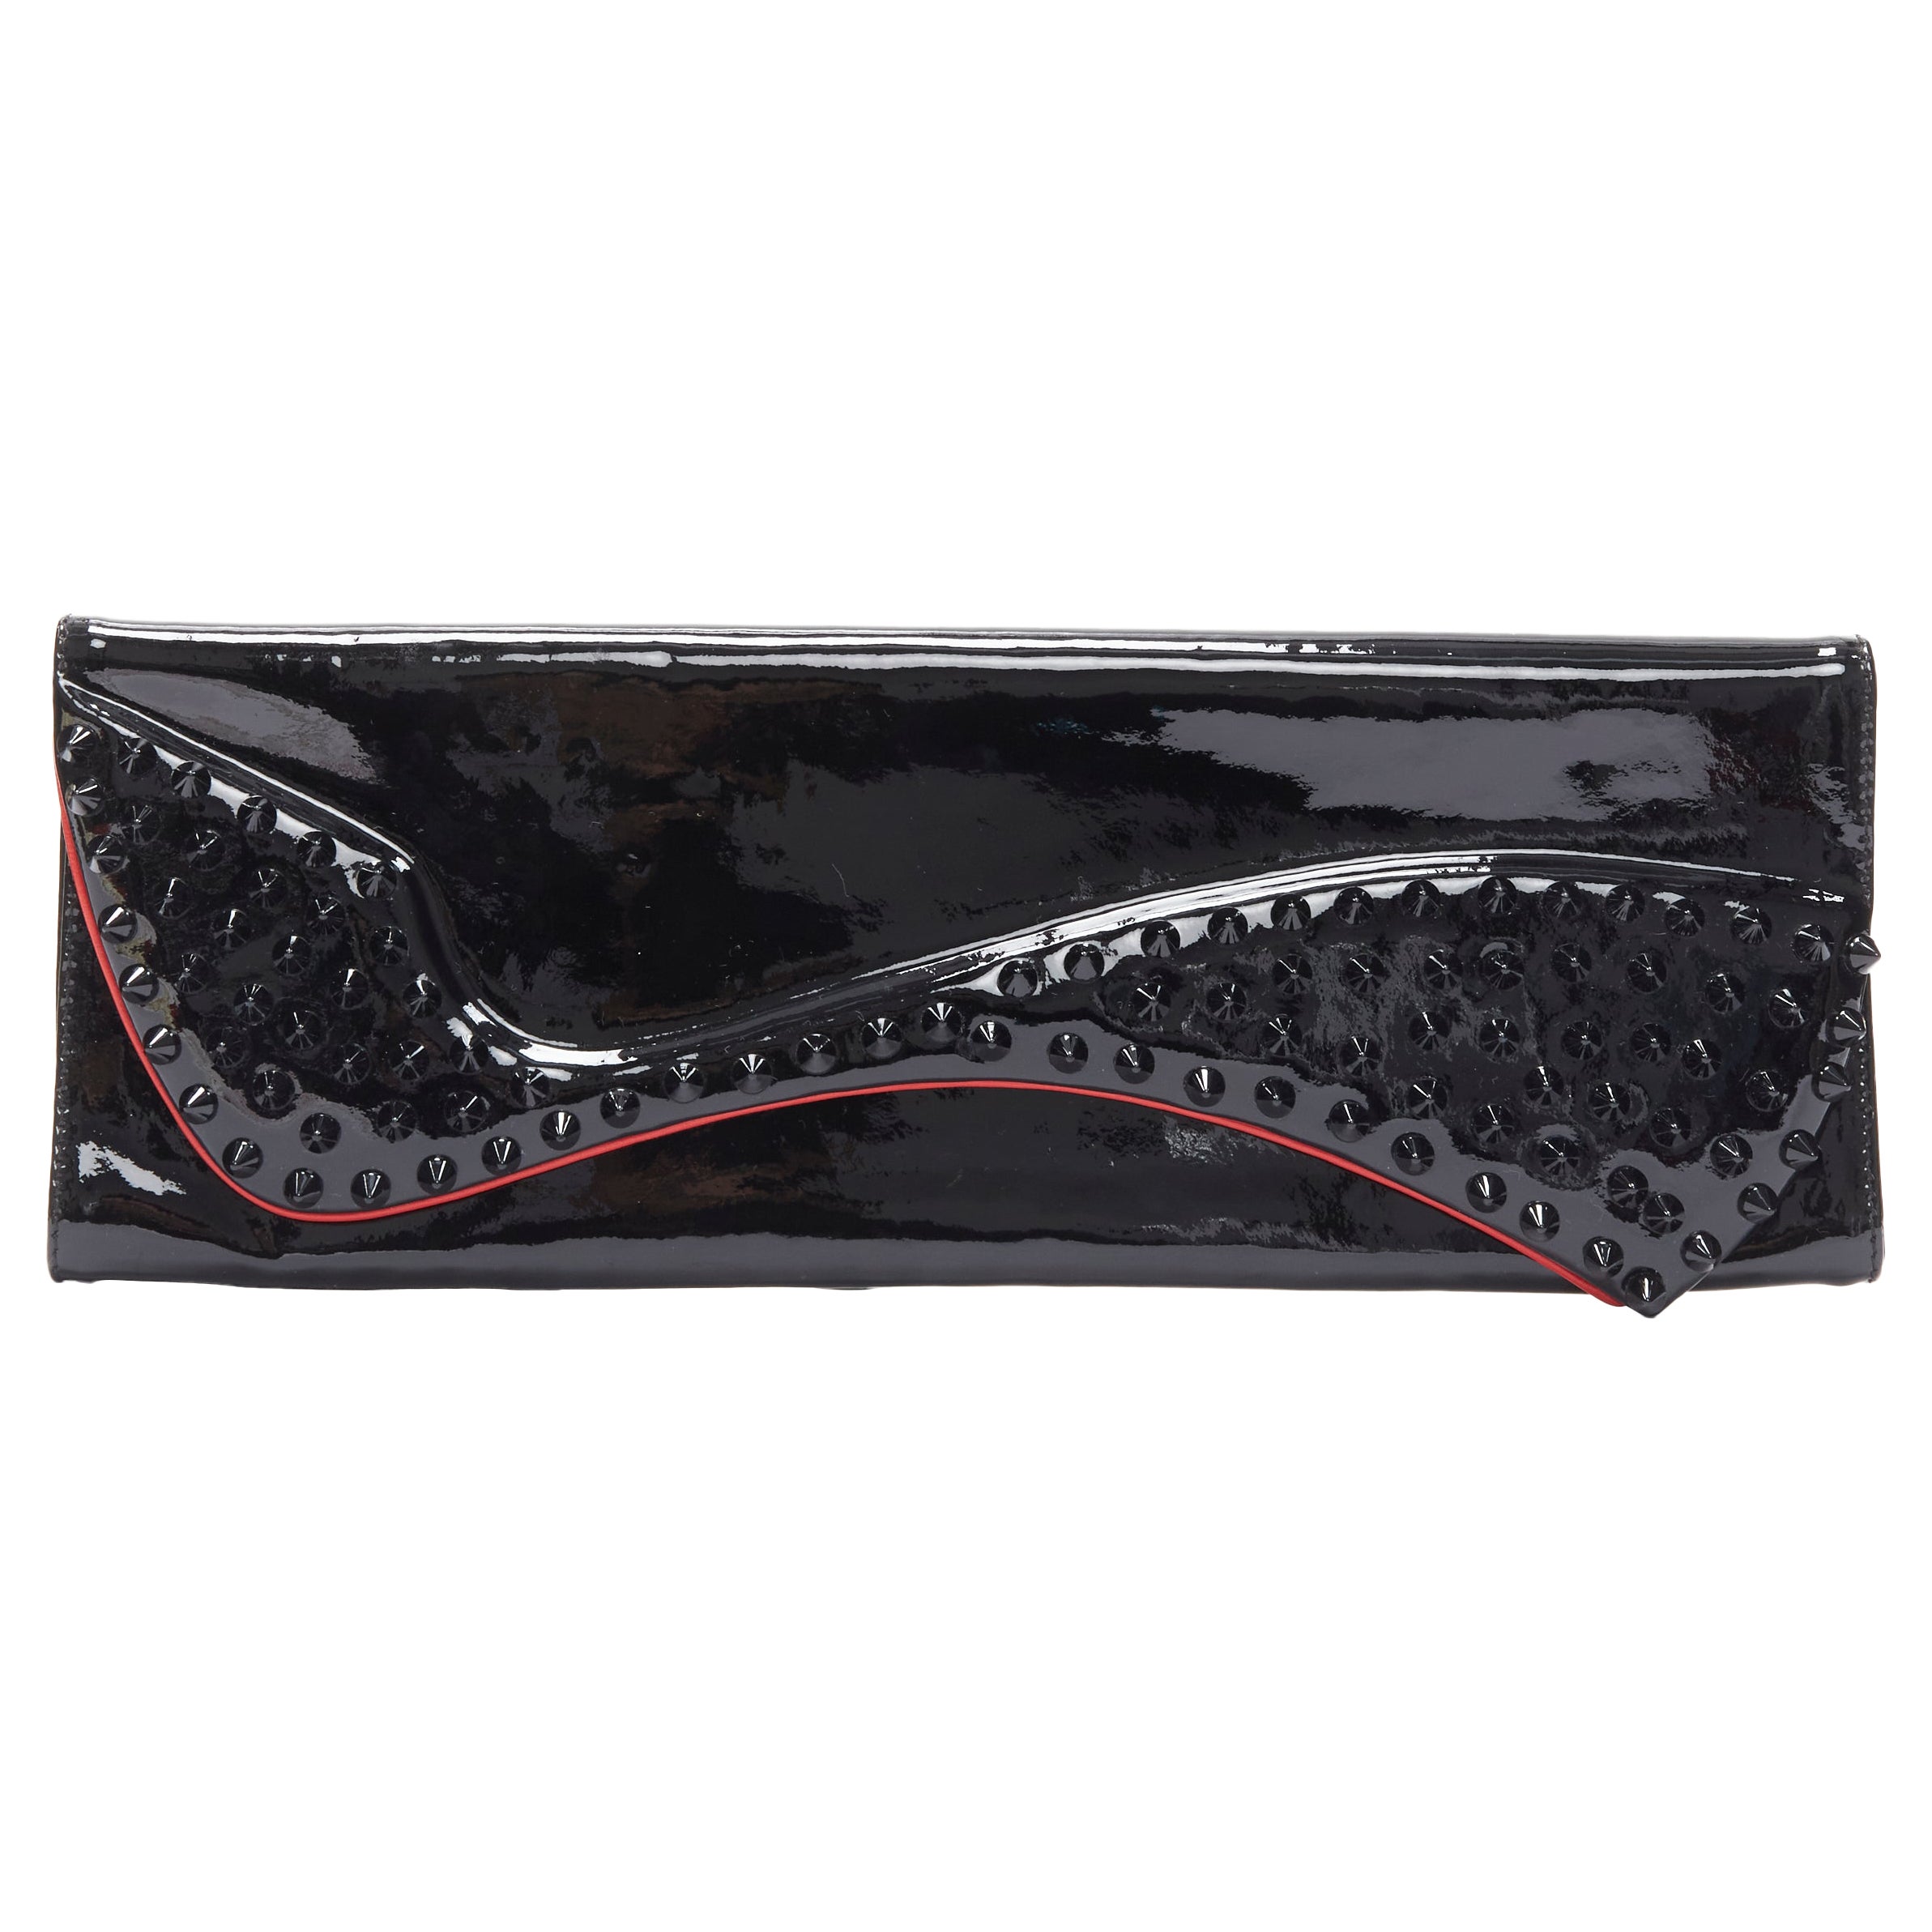 CHRISTIAN LOUBOUTIN Pigalle silhouette black patent spike stud  flap clutch bag